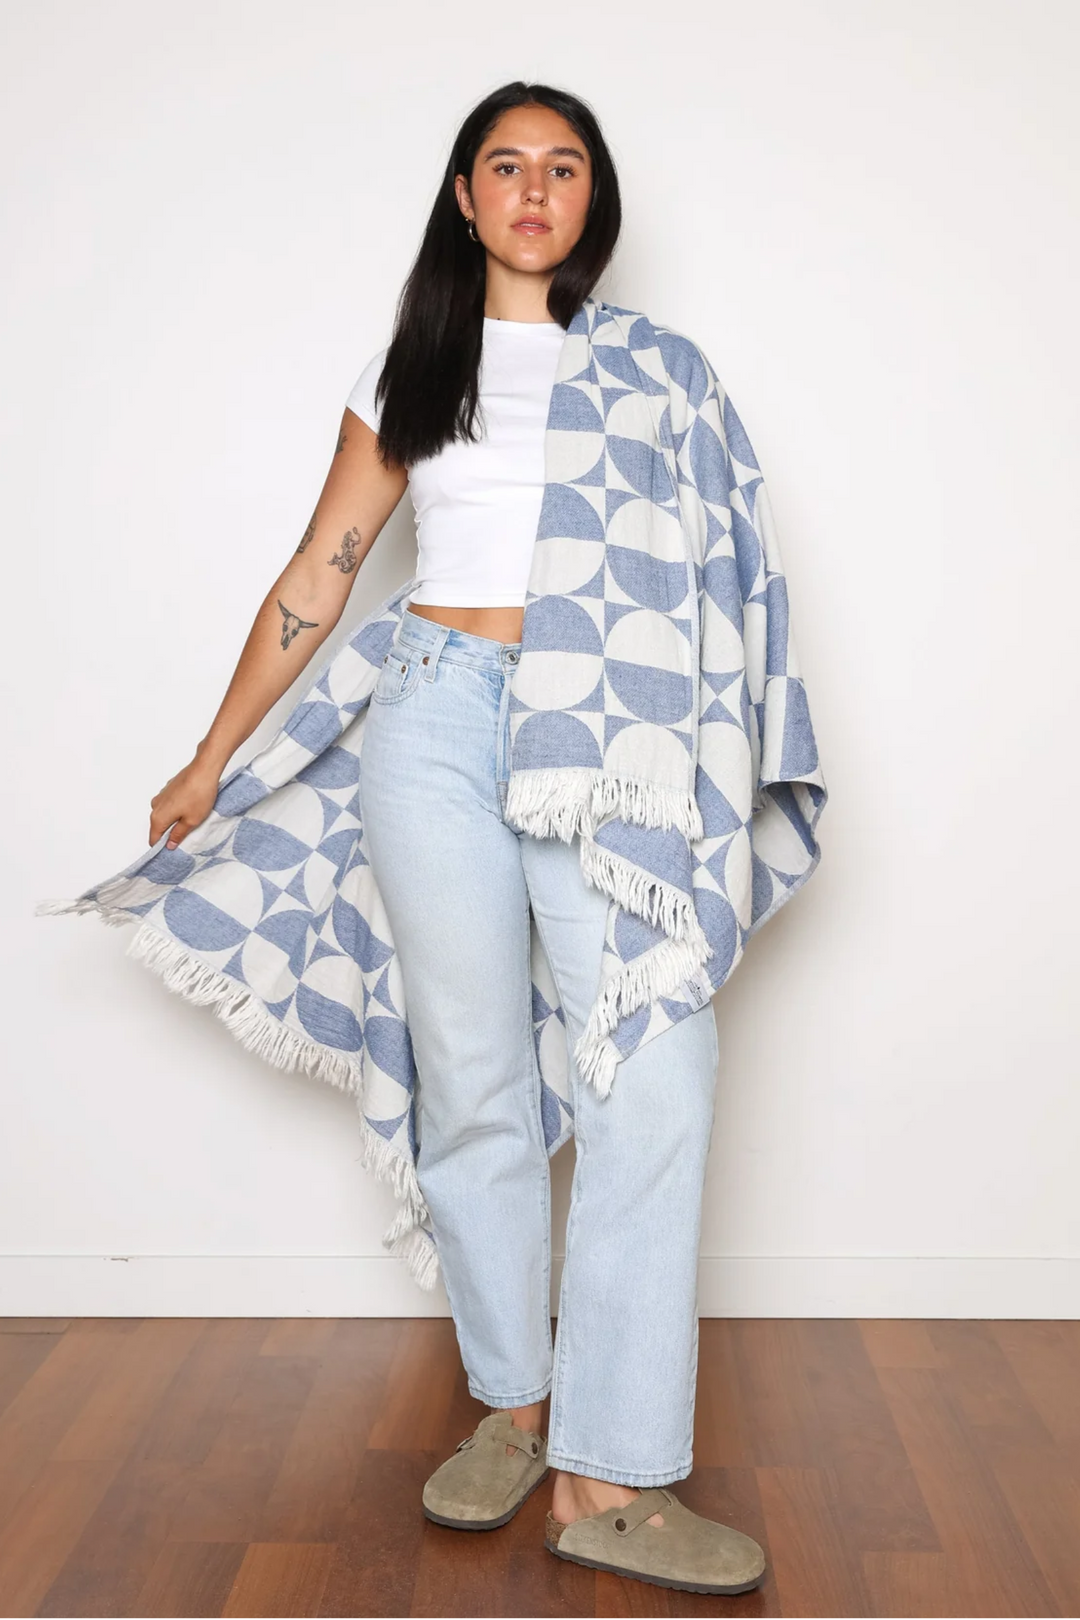 THE PHASE | Turkish Towel